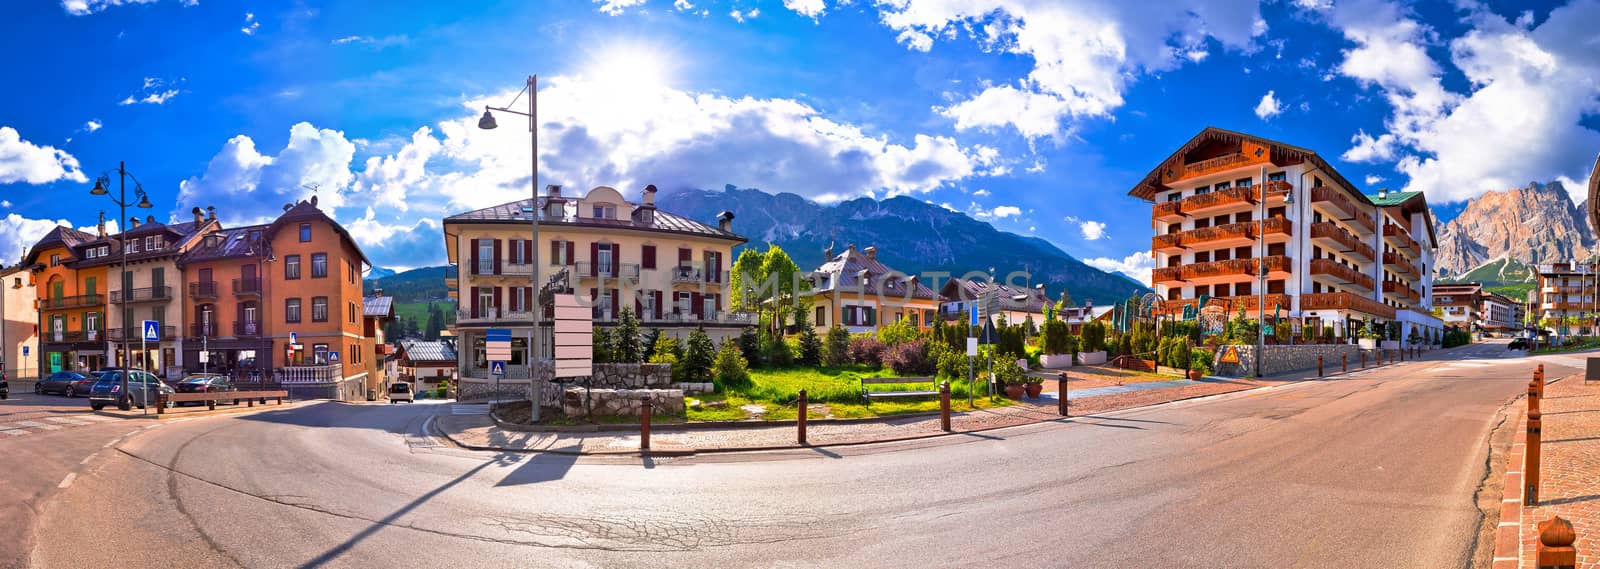 Cortina D' Ampezzo street and Alps peaks panoramic view by xbrchx